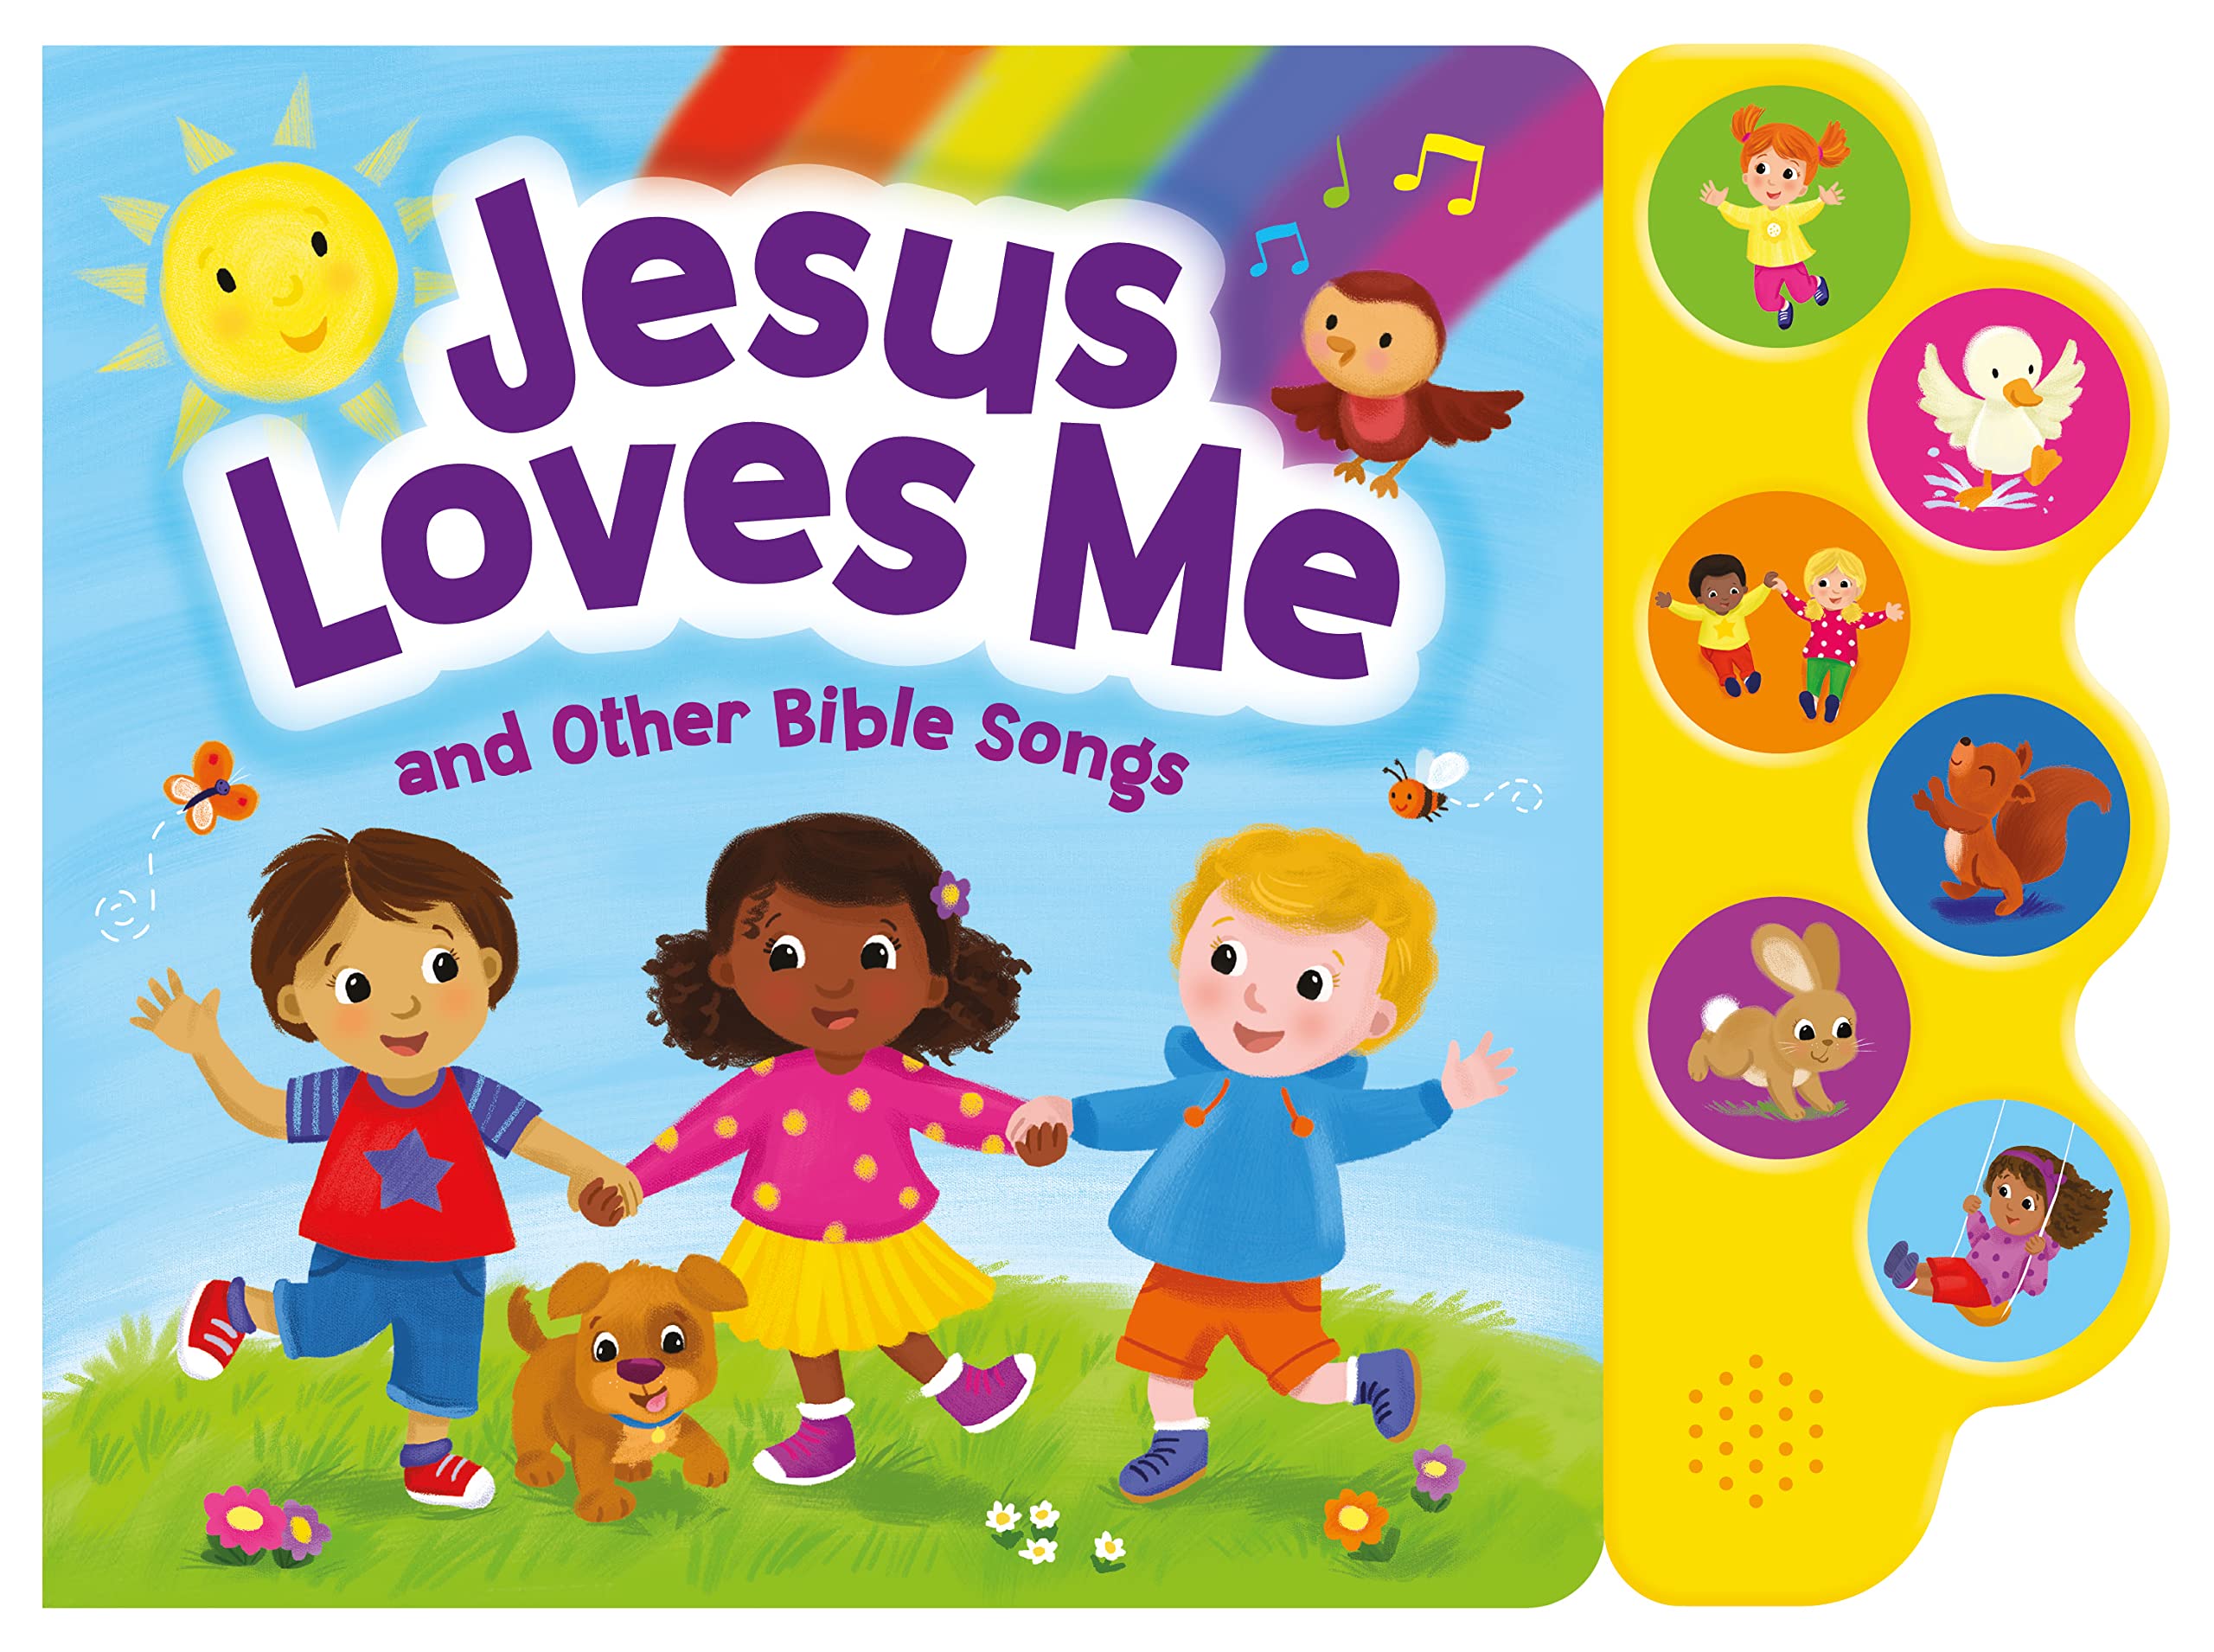 Jesus Loves Me and Other Bible Songs - Christian Children’s Books with 6 Sound Buttons for Toddlers